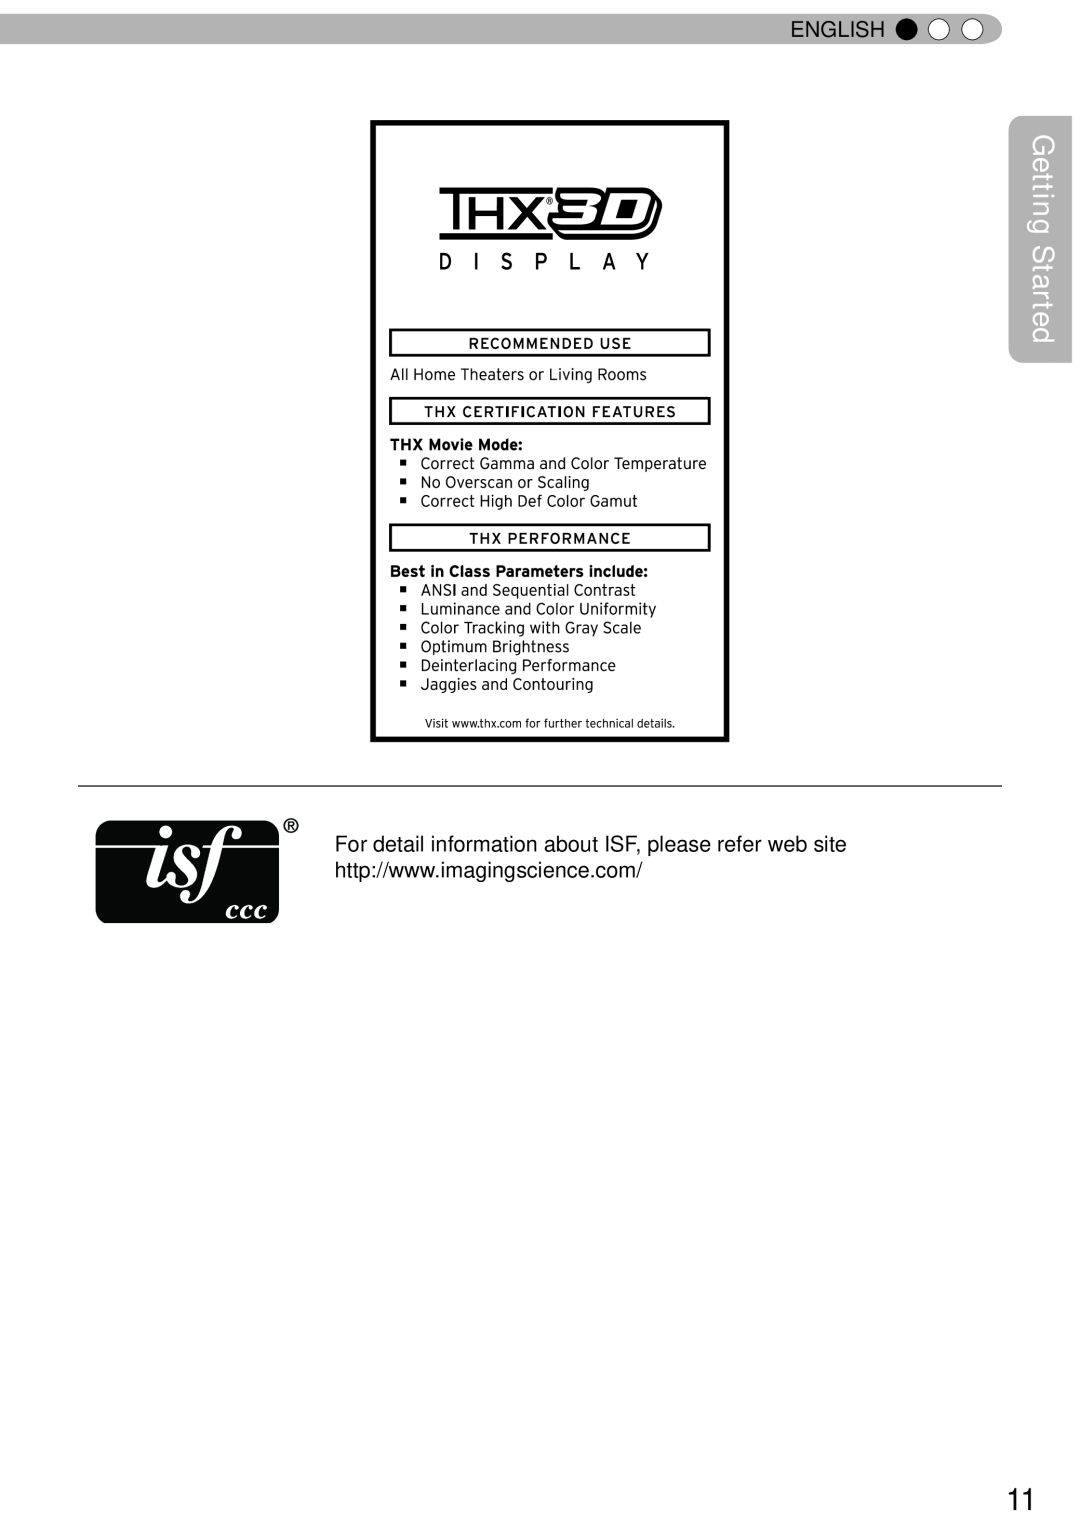 JVC DLA-RS50, DLA-RS40, DLA-RS60 manual For detail information about ISF, please refer web site, Getting Started, English 